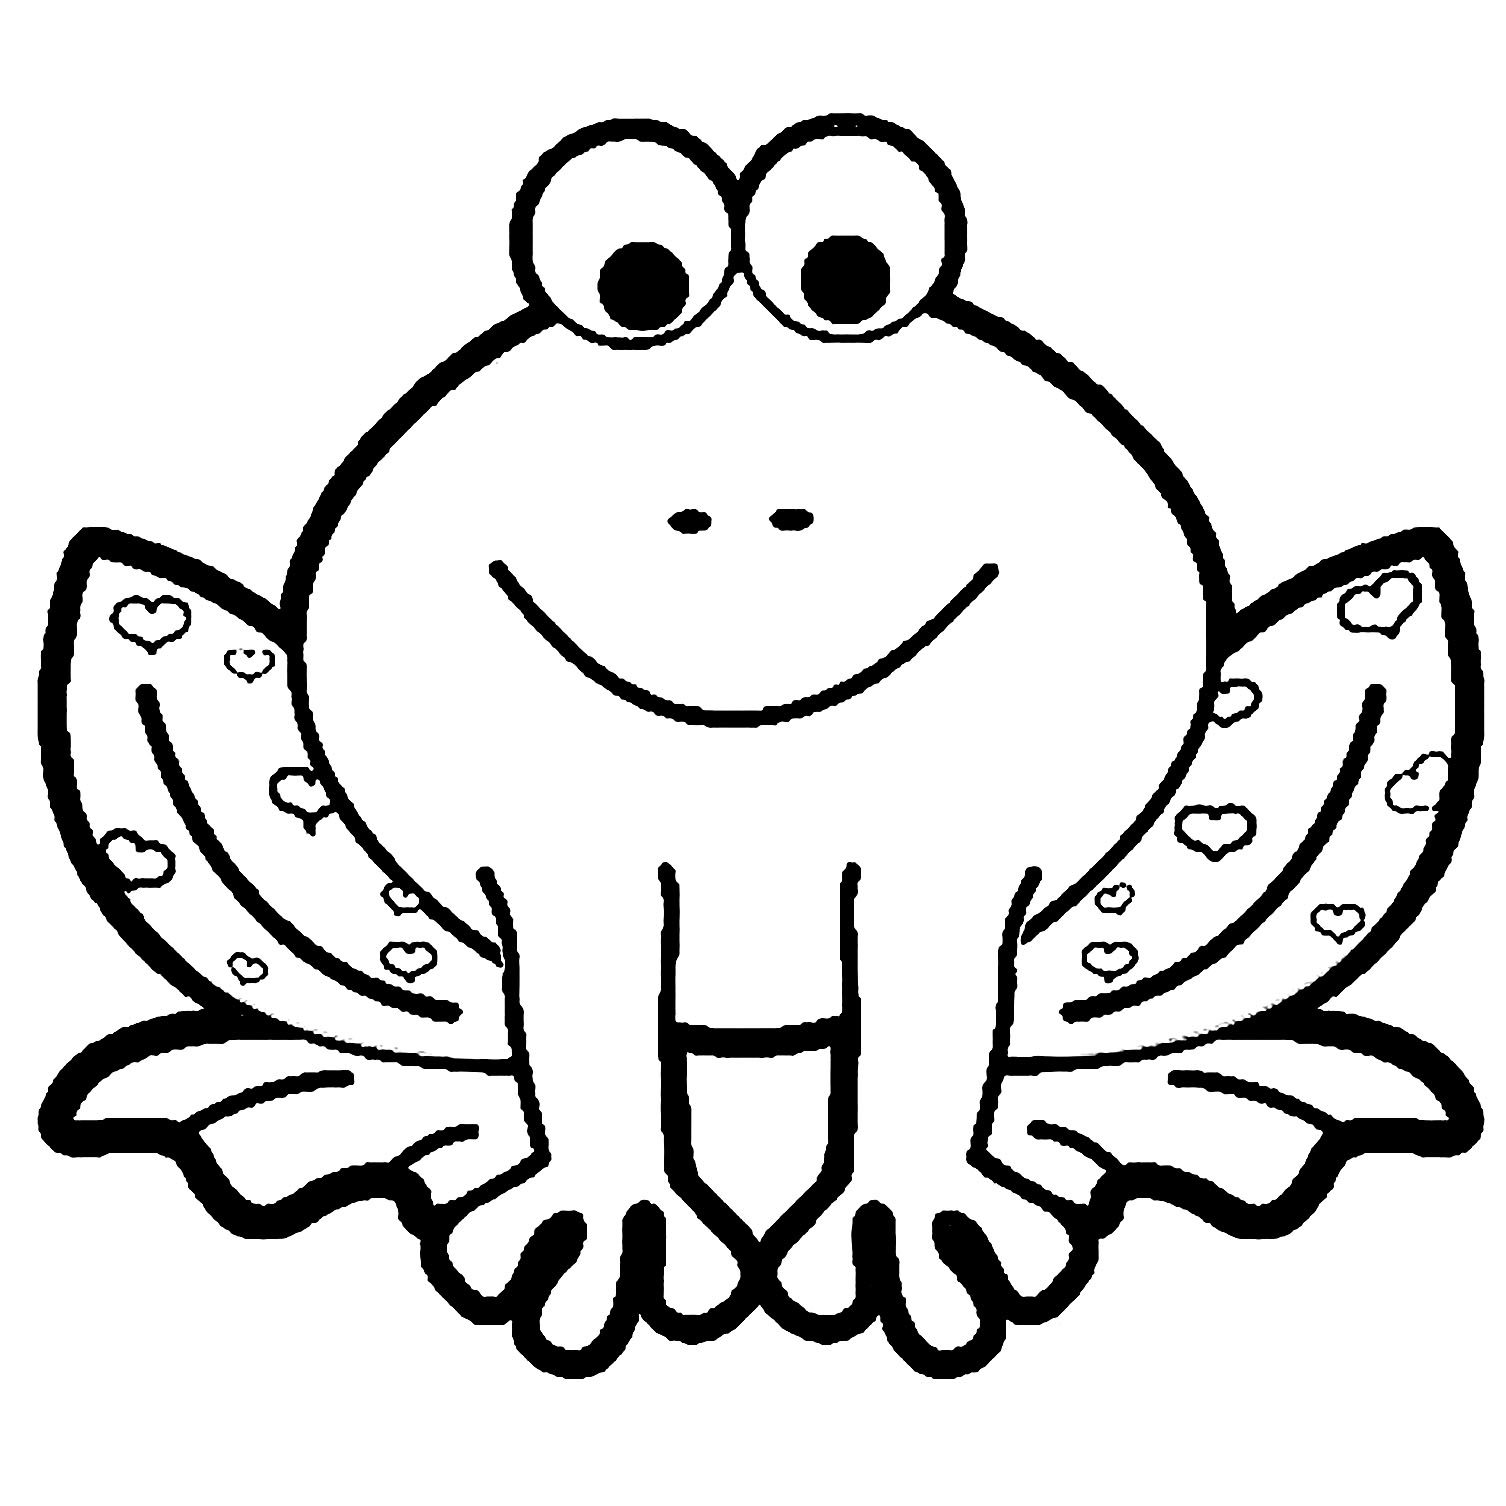 Free frog coloring â hearts to print free frog coloring